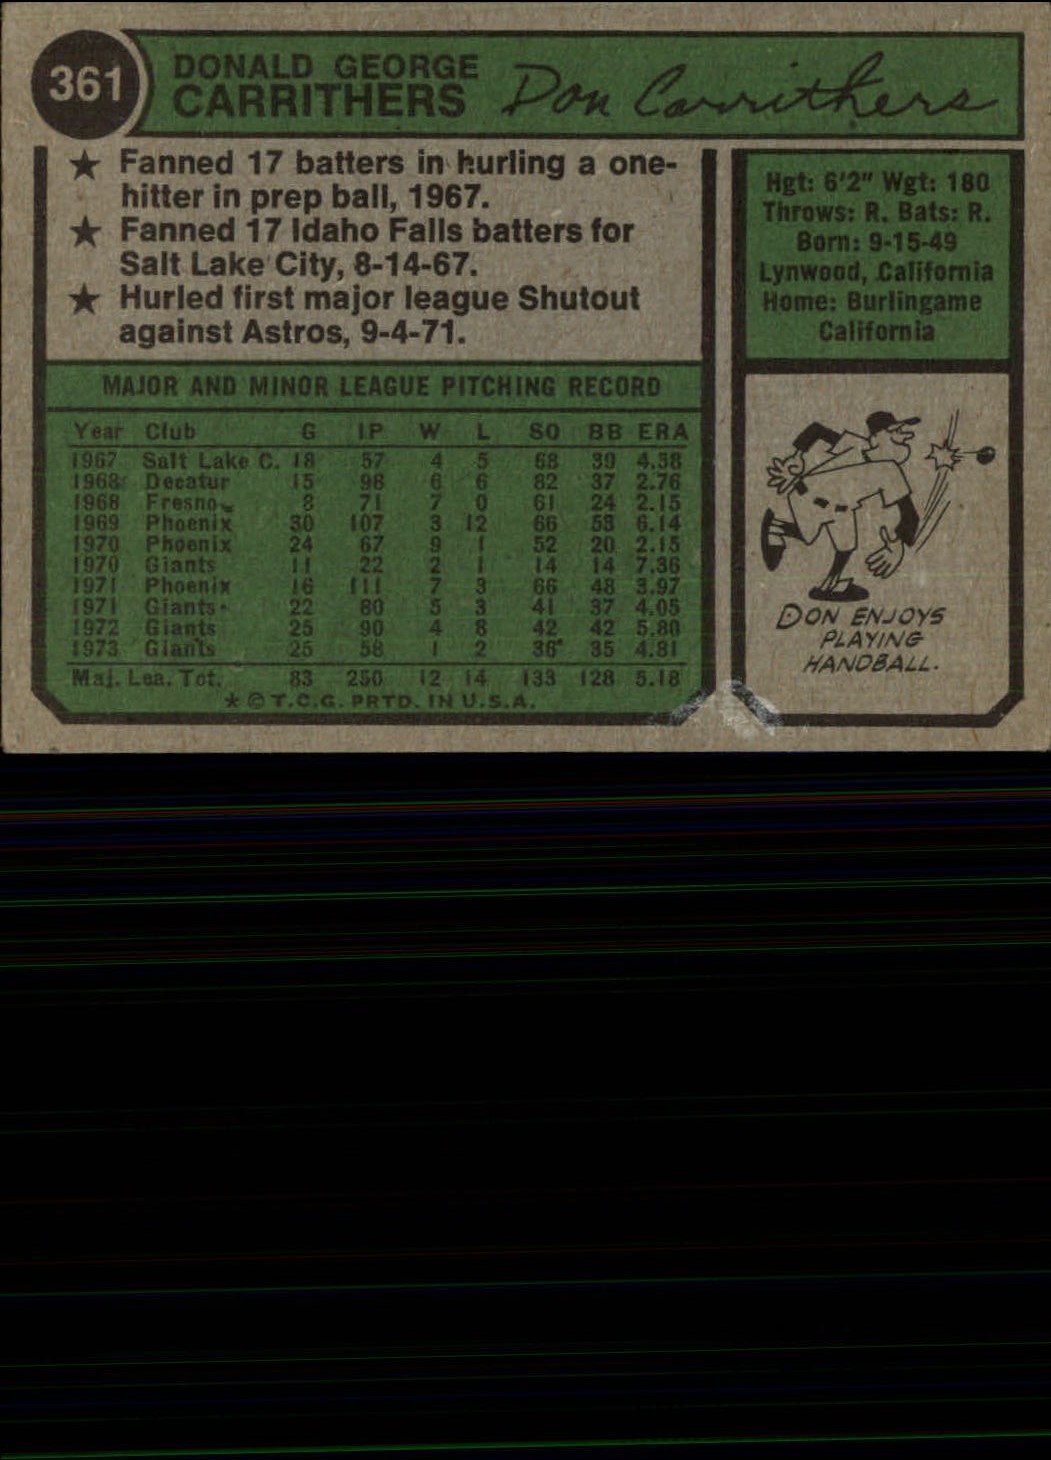 1974 Topps #361 Don Carrithers back image